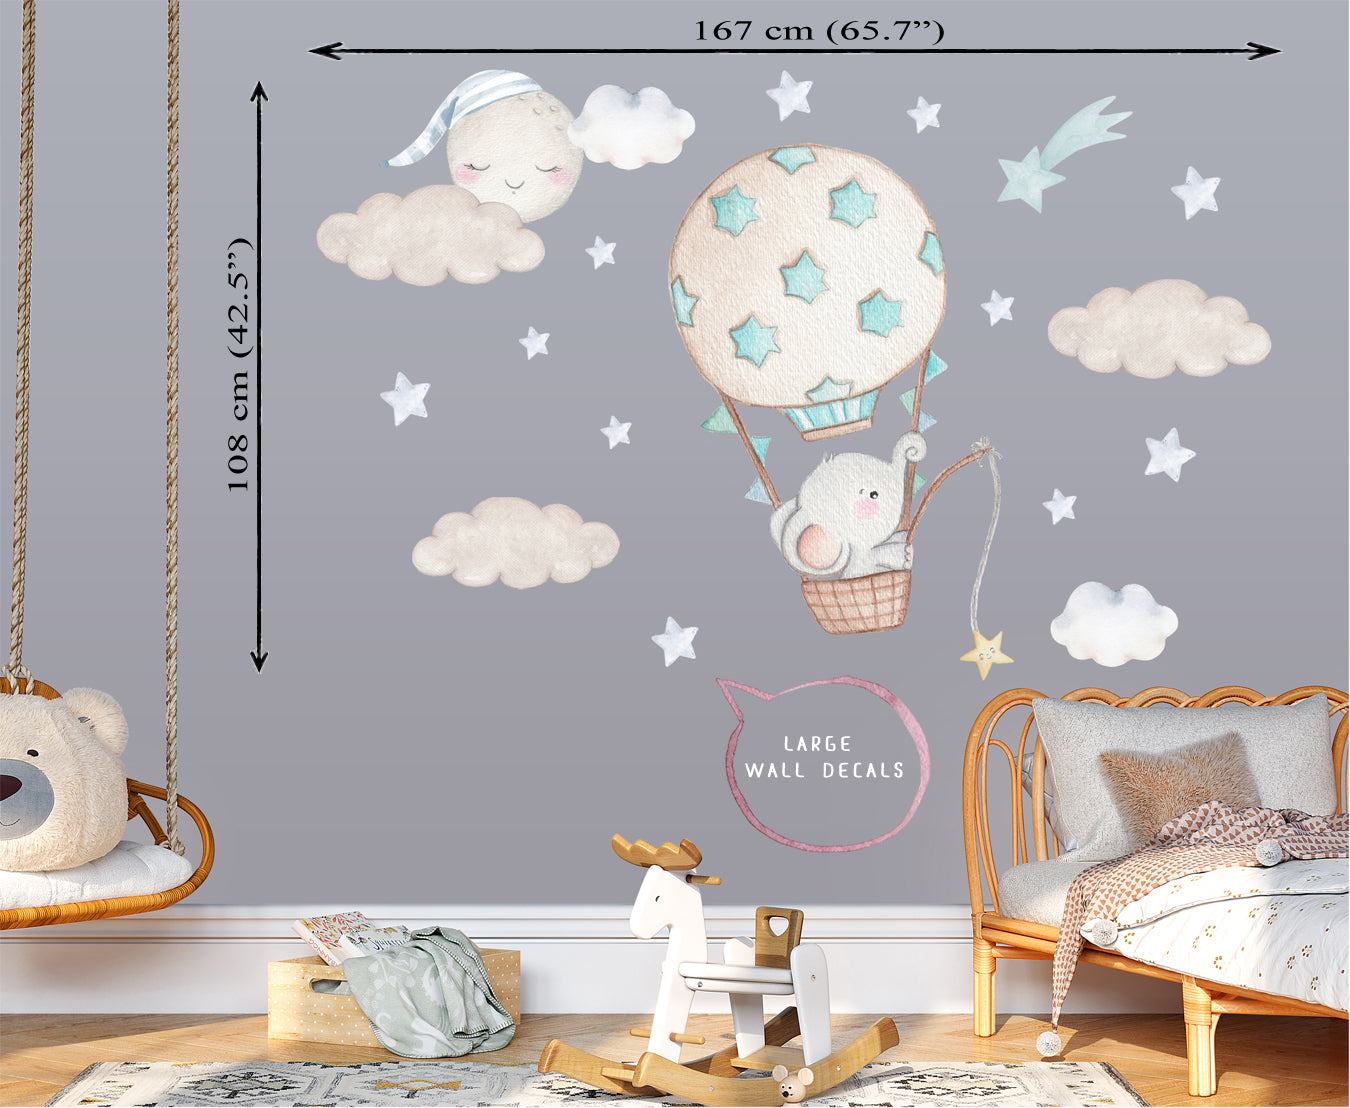 The elephant in the hot air balloon. Big wall stickers for boy's room. Blue stars.